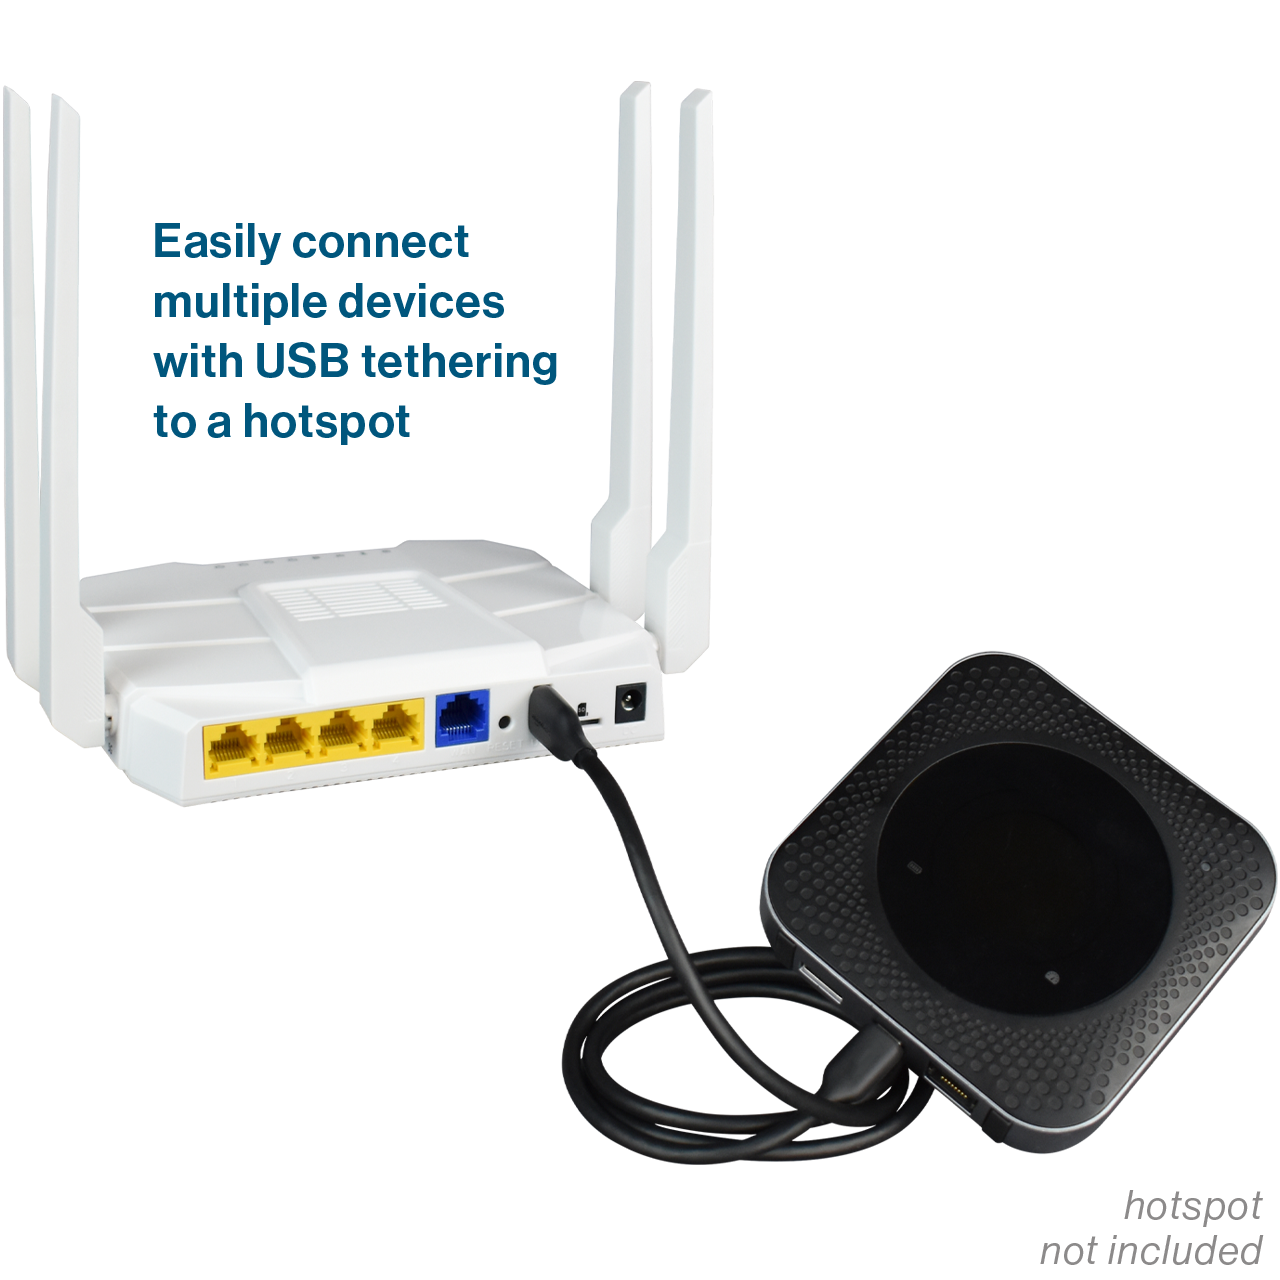 DARTWOOD Wireless Mesh WiFi Extender Range Repeater to Boost Wi-Fi Signal  and Eliminate Dead Zones Network Adapter, White WifiExtenderUS - The Home  Depot